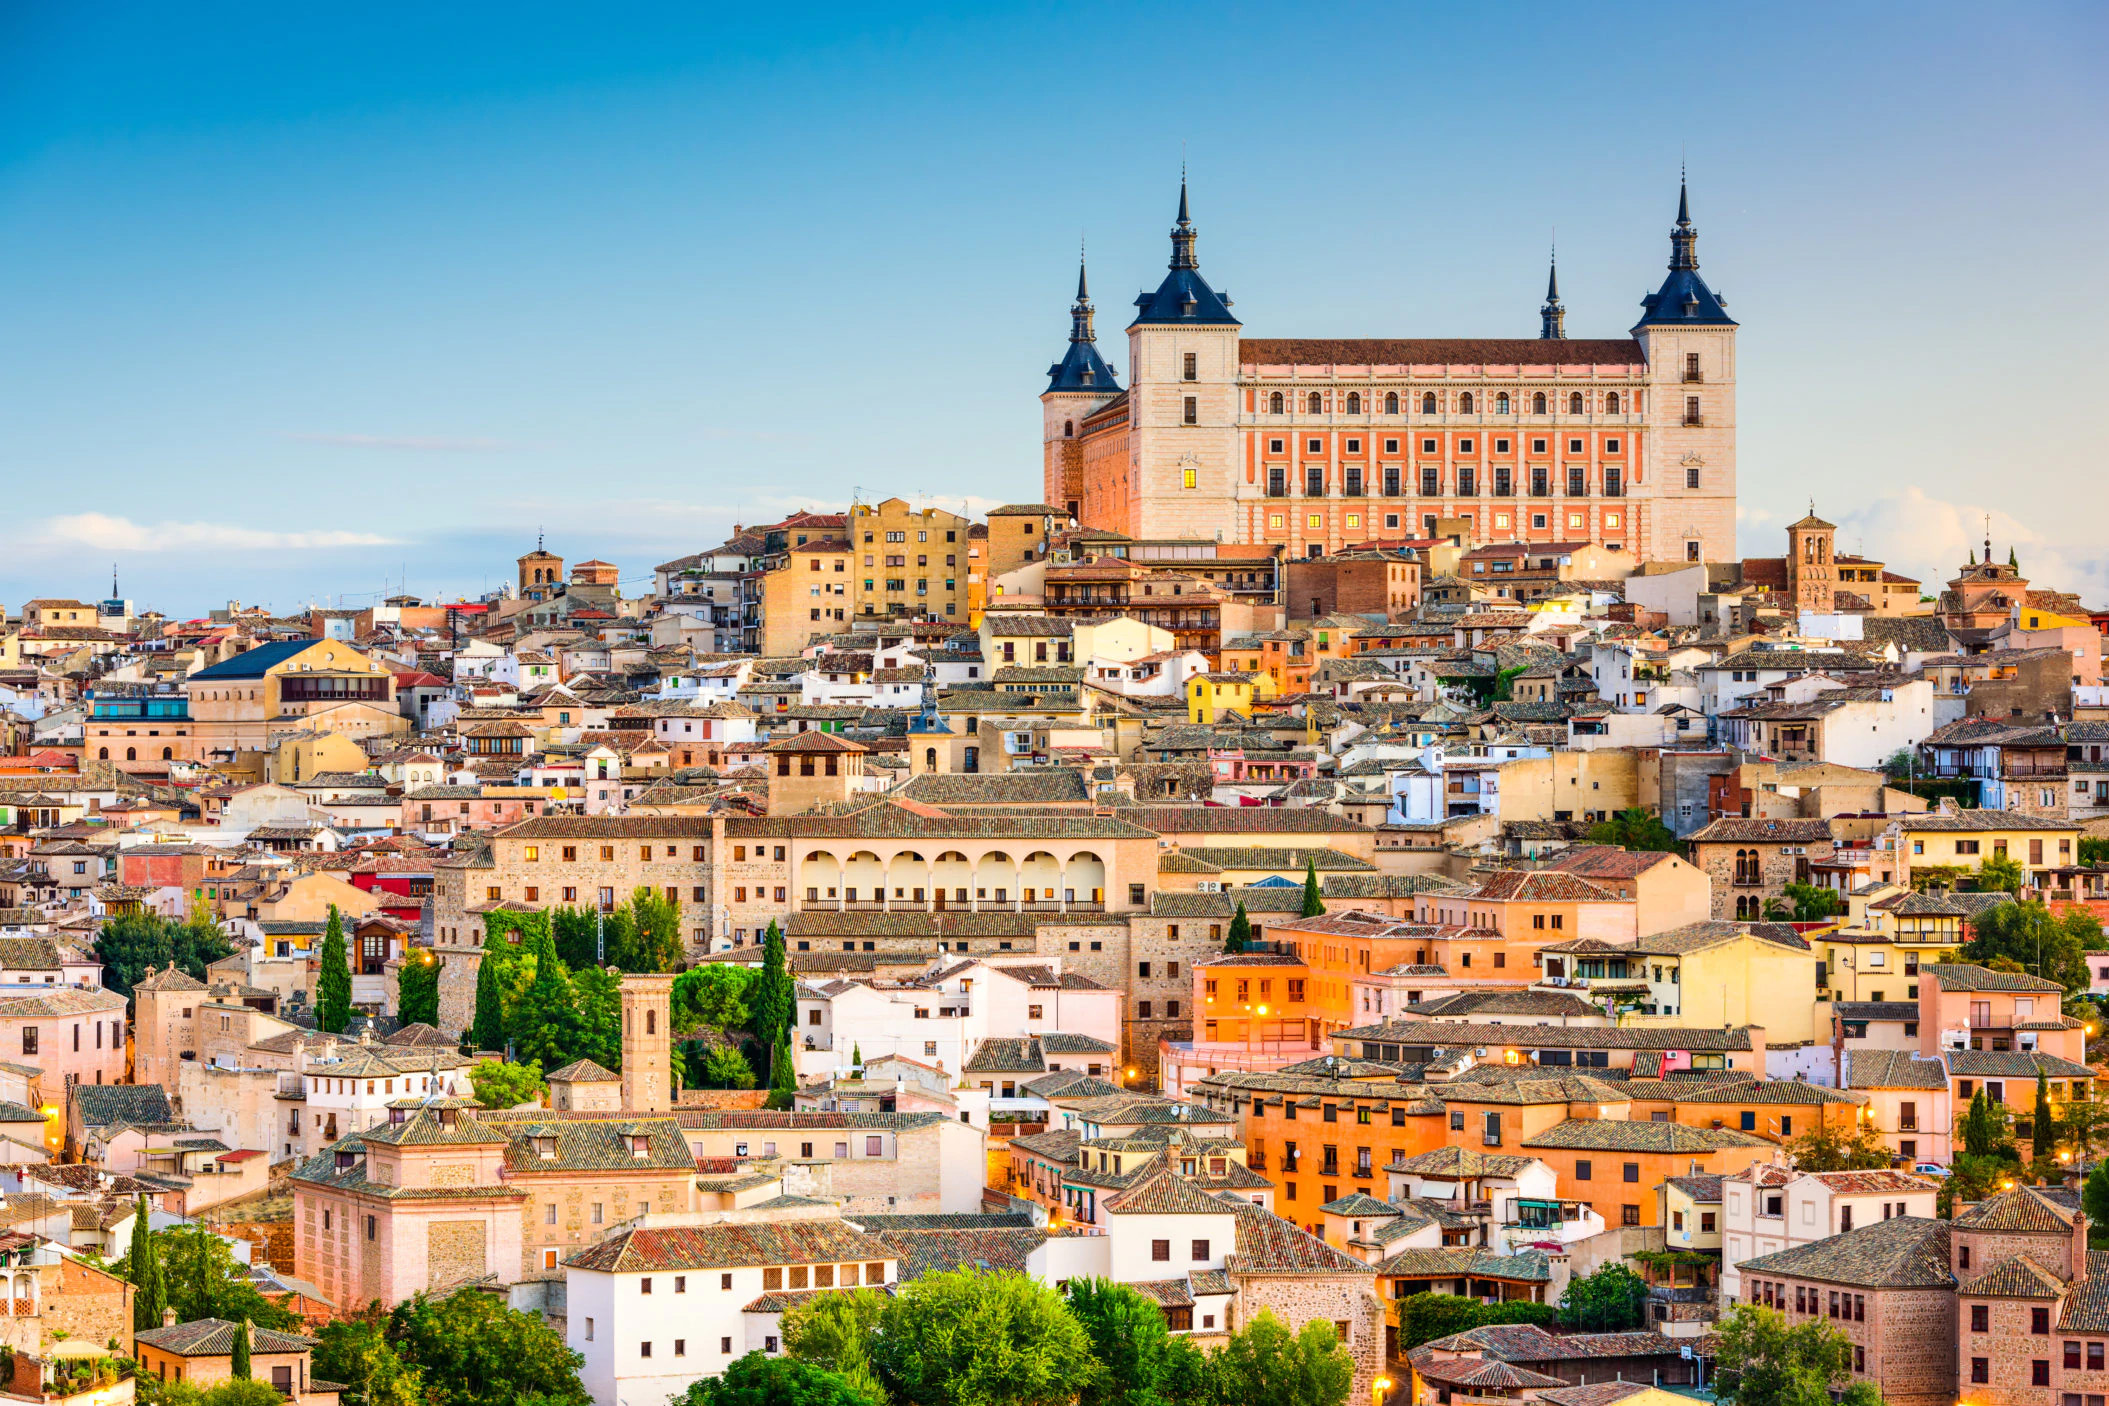 30 interesting facts about Spain